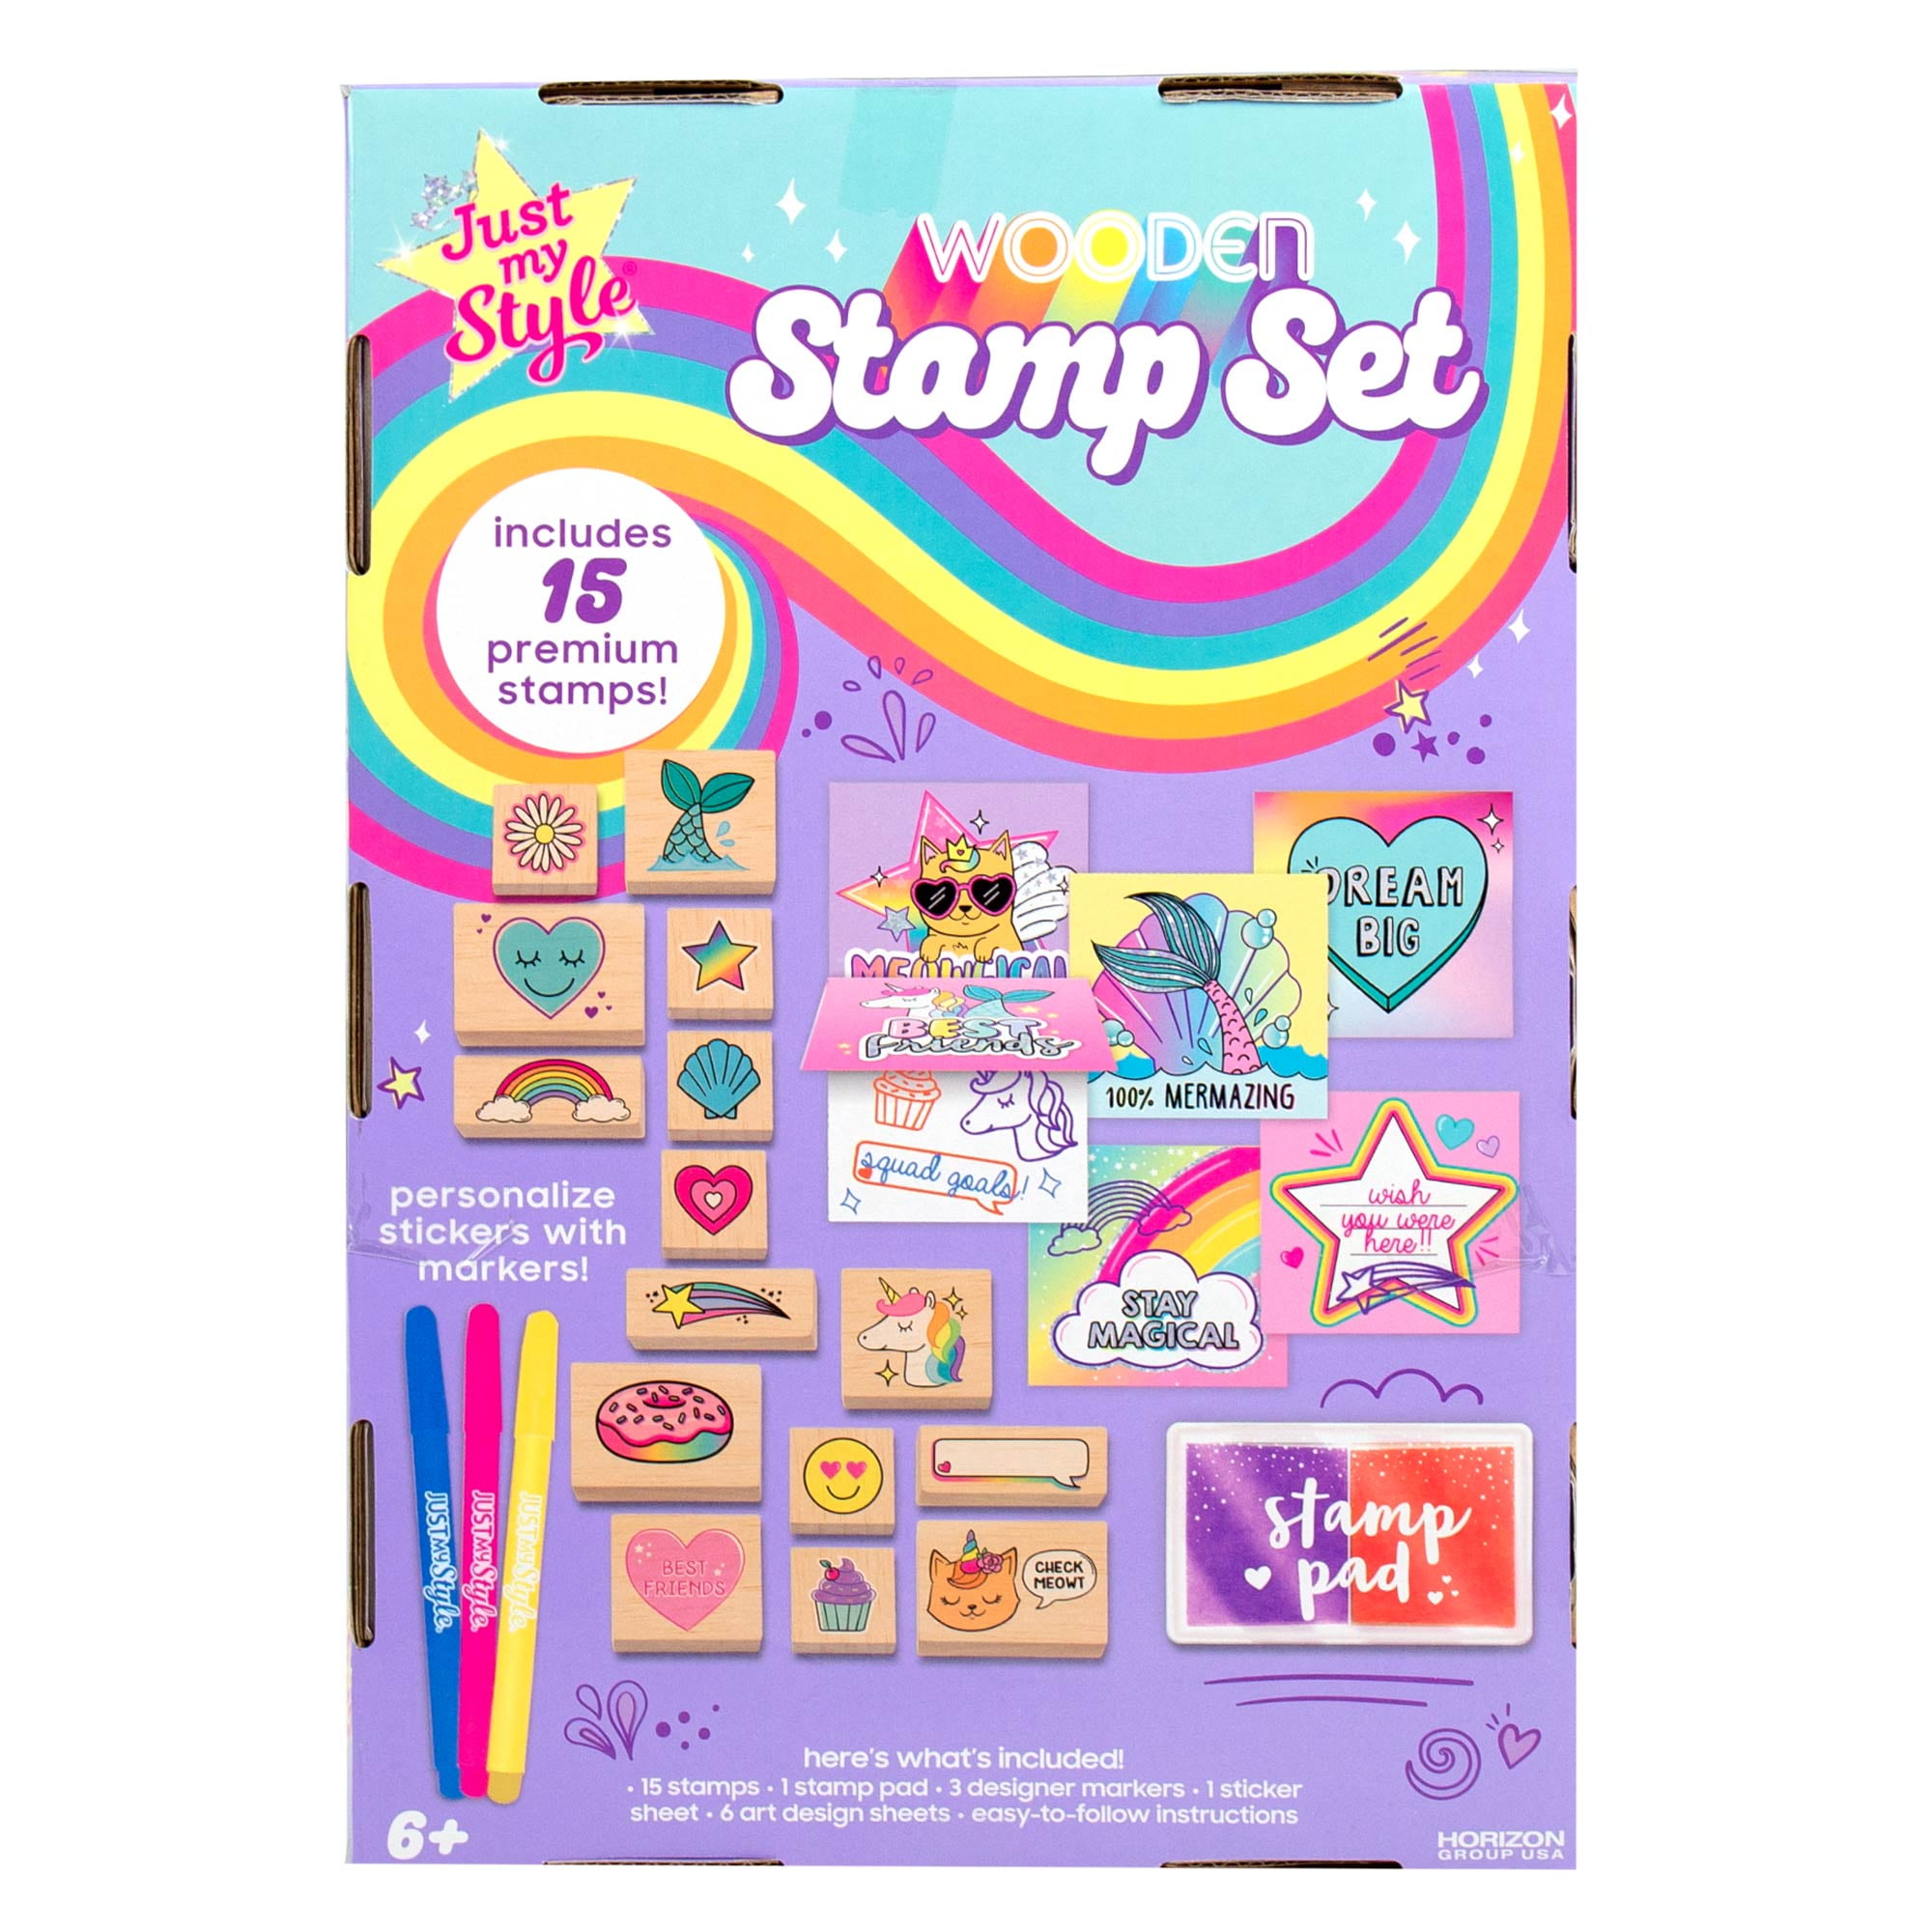 Just My Style Wooden Stamp Set, Includes 15 Premium Stamp Designs